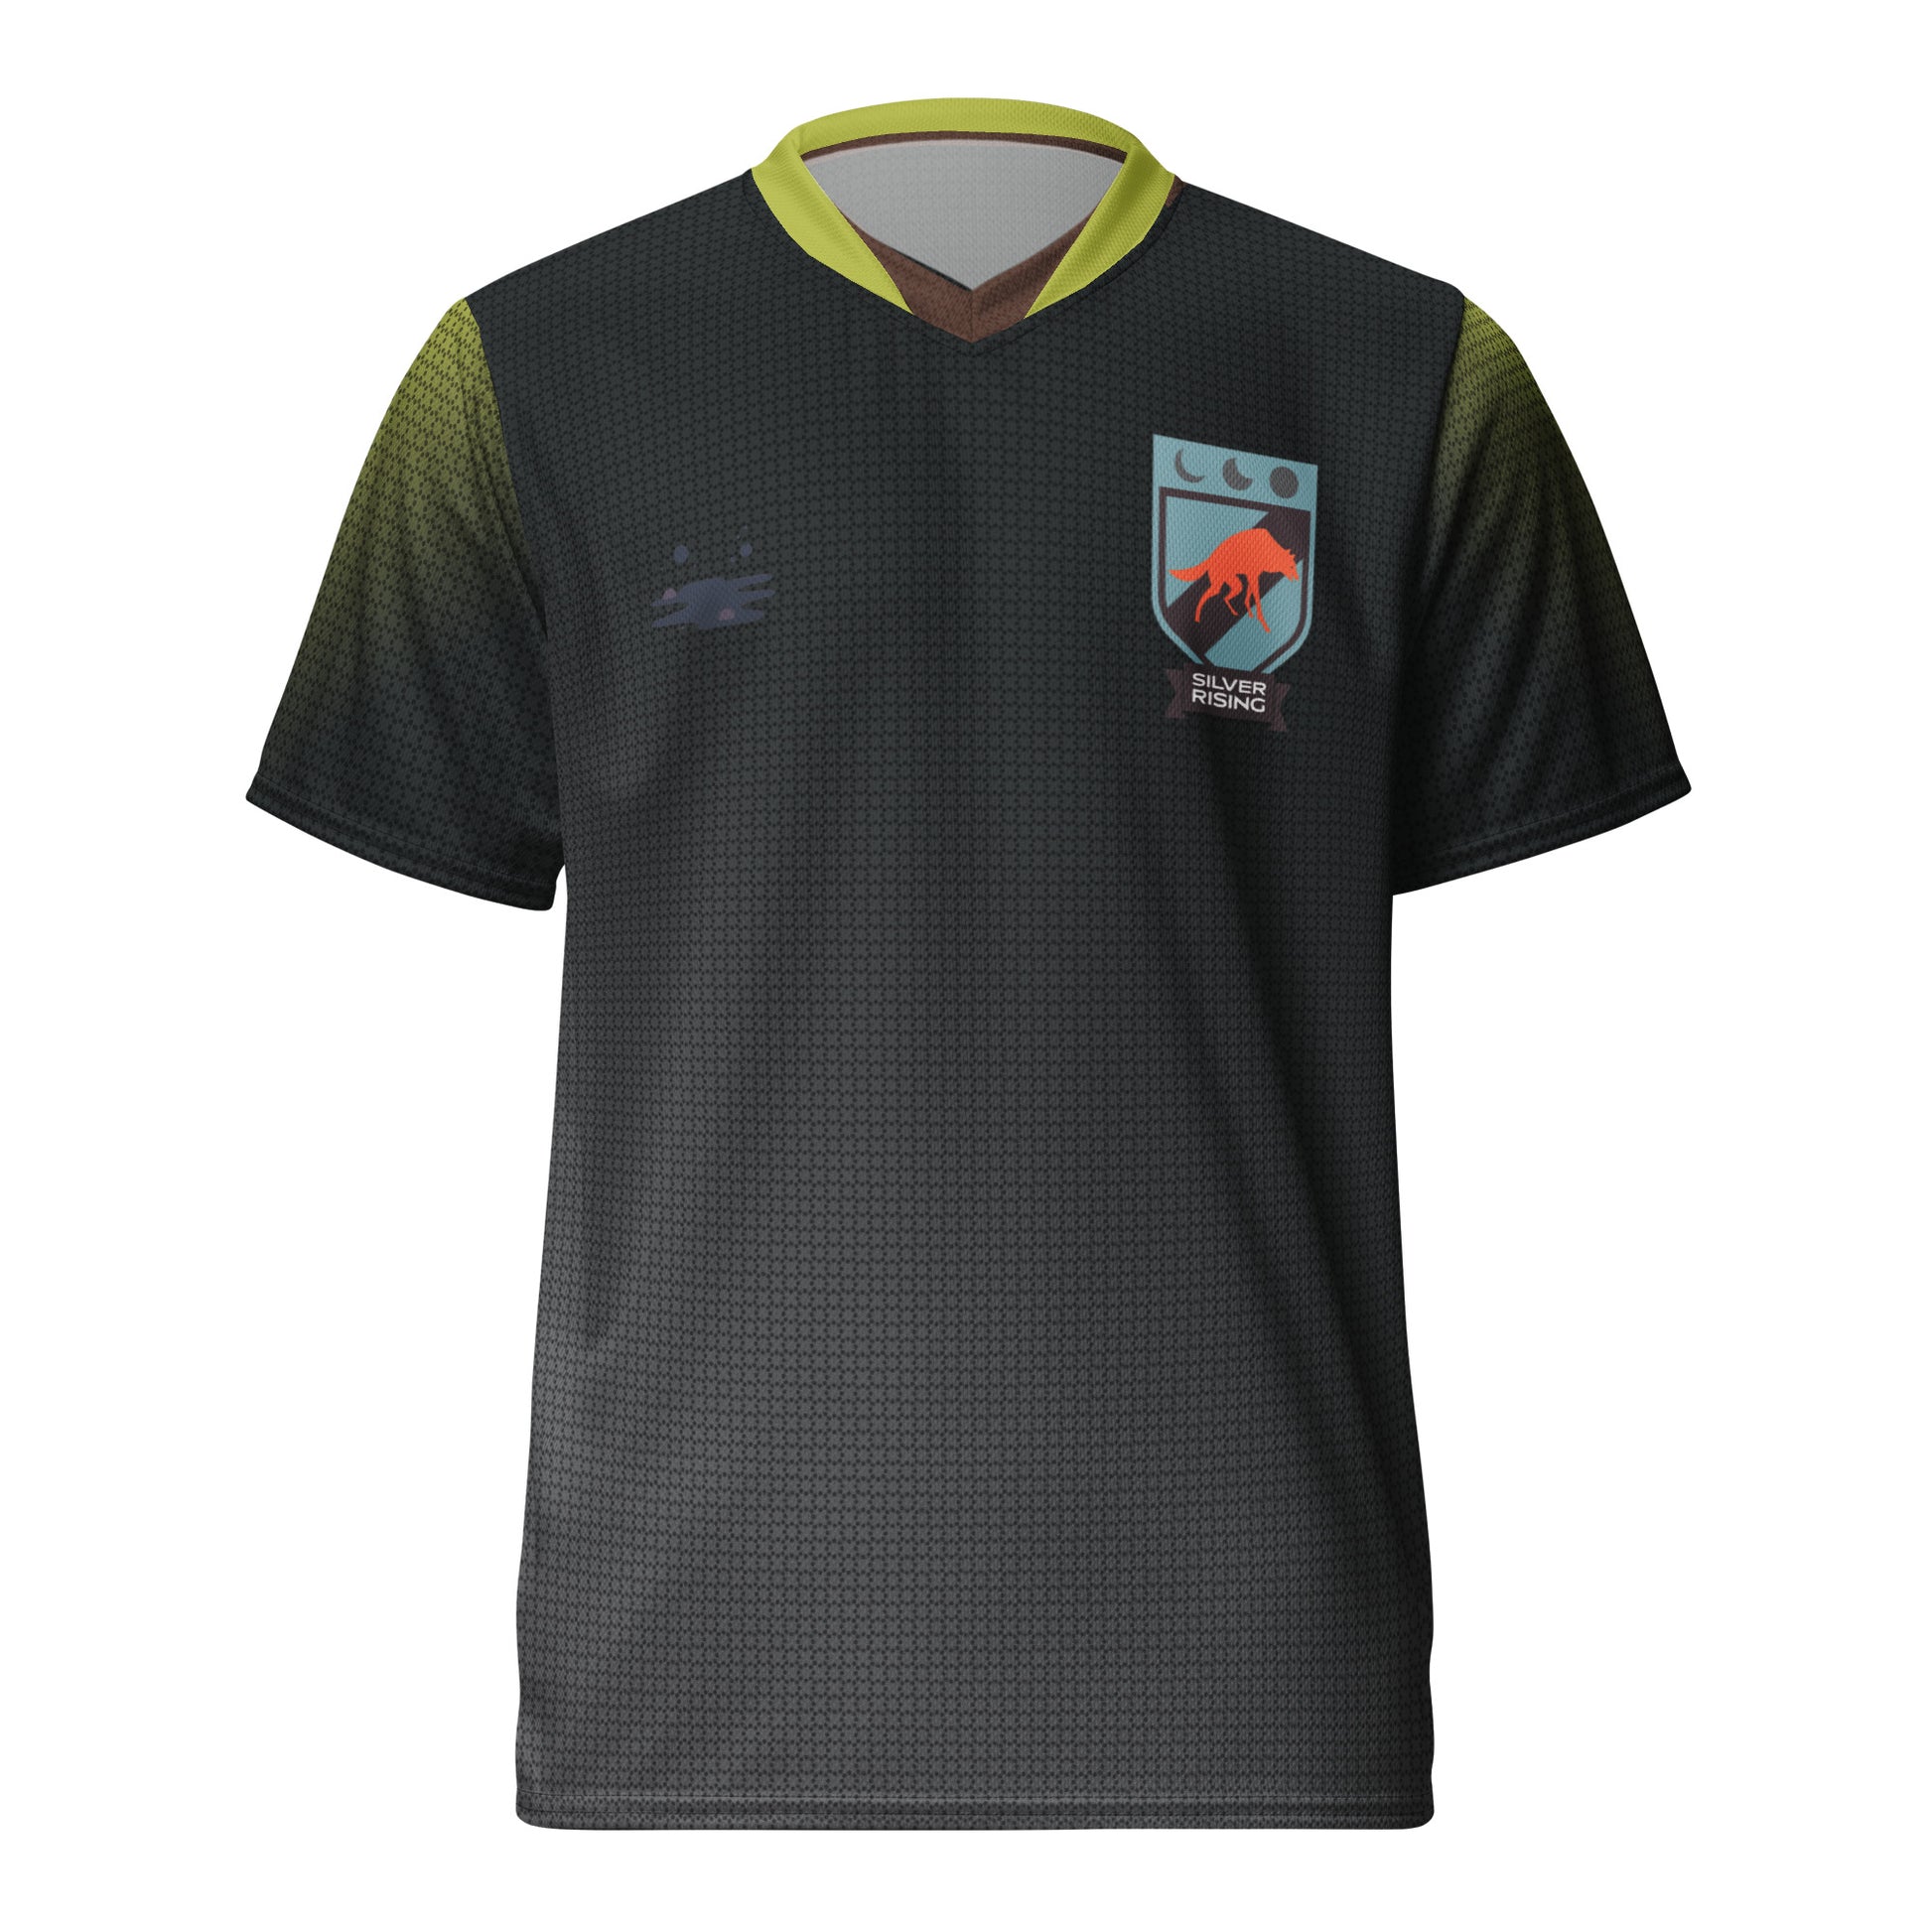 Silver Rising Jersey - mudfm